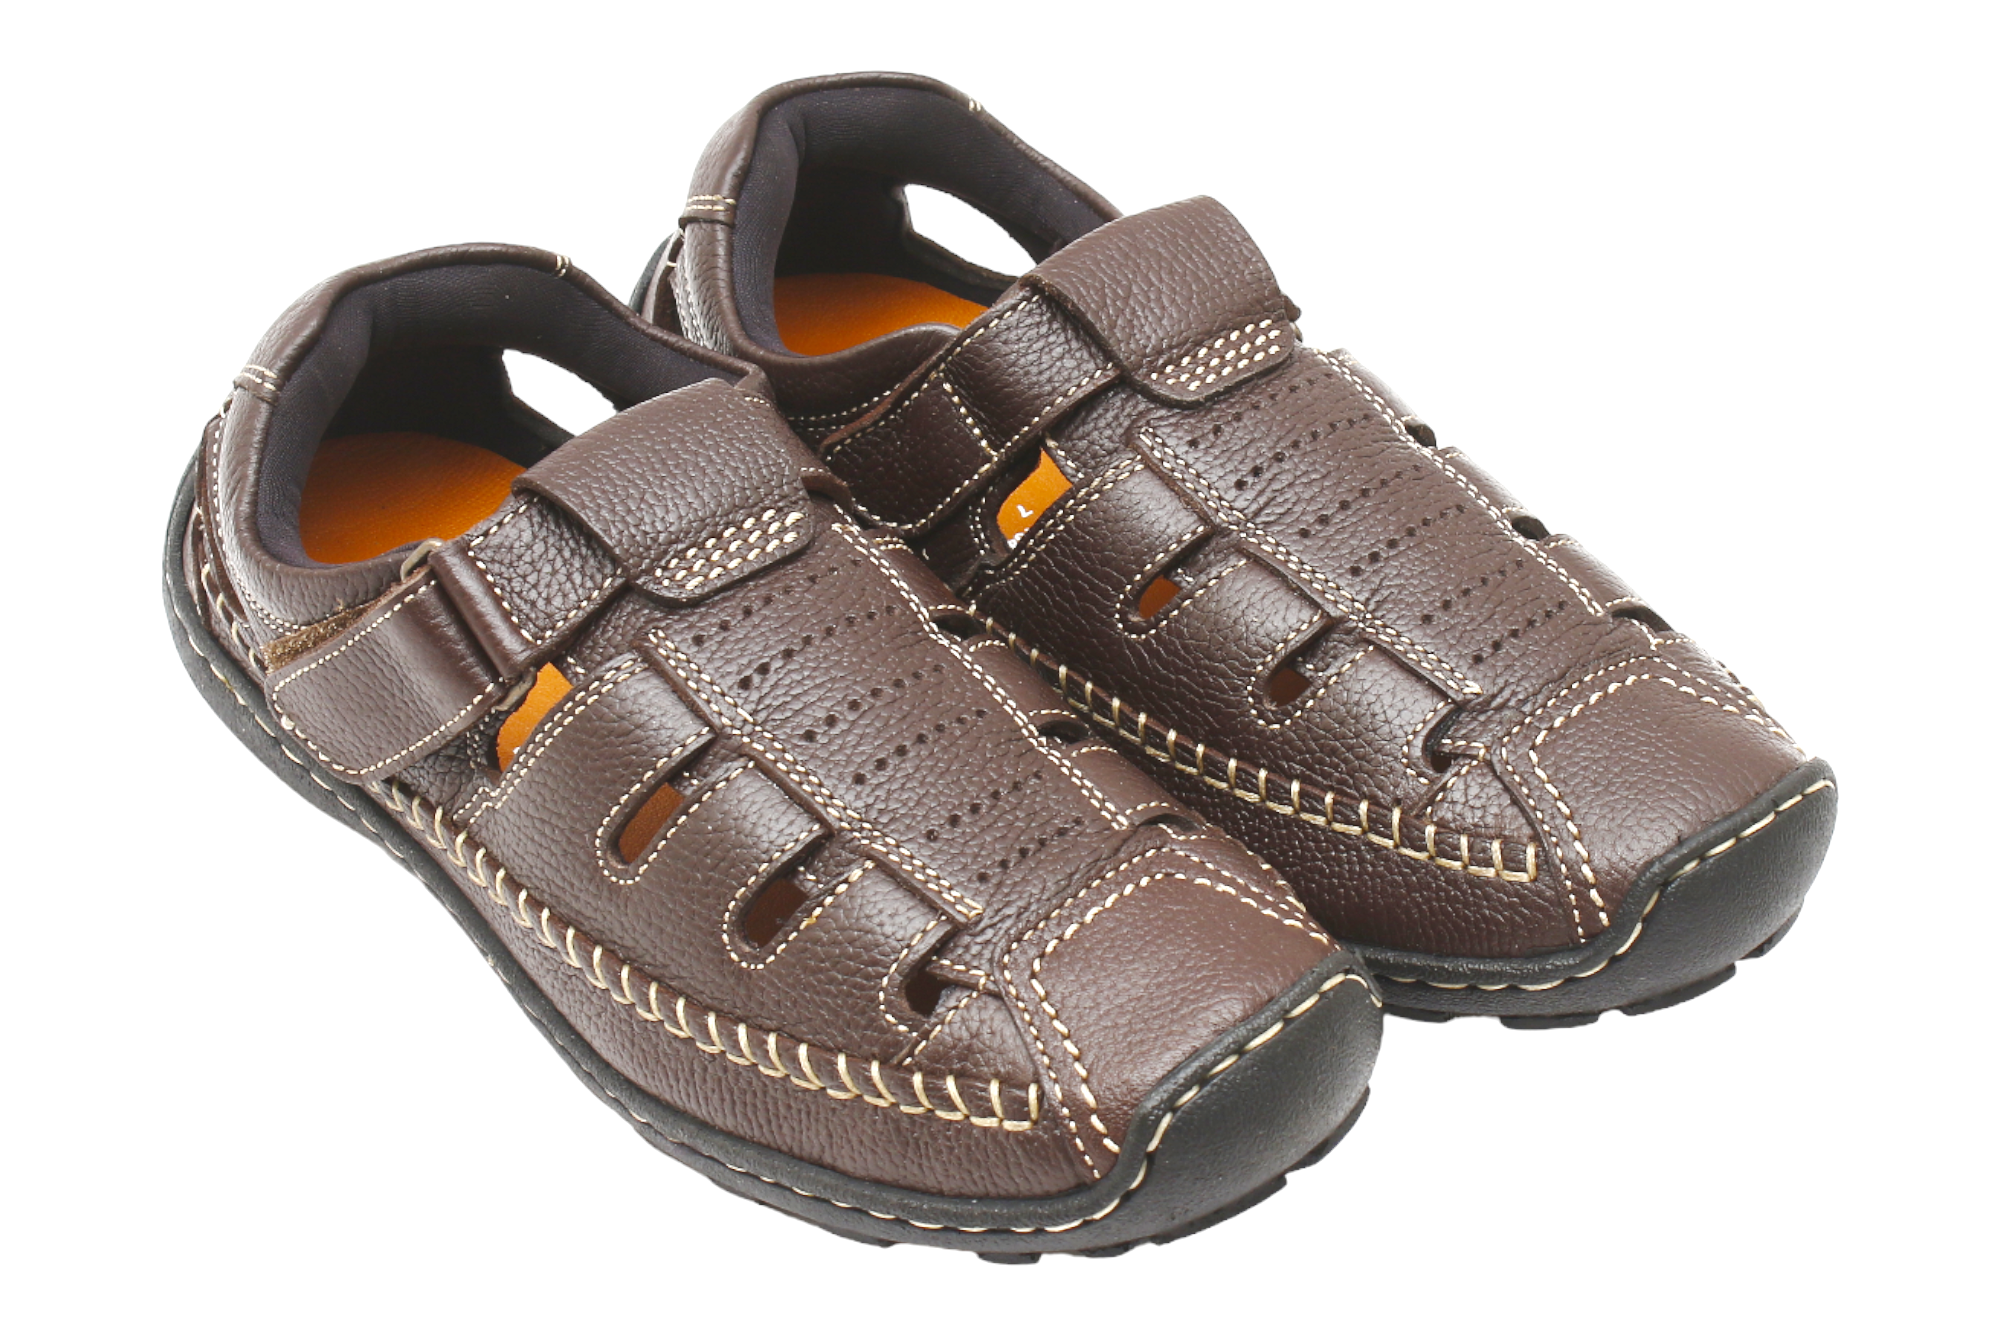 Taos PERFECT Yellow Leather Sandals - Family Footwear Center